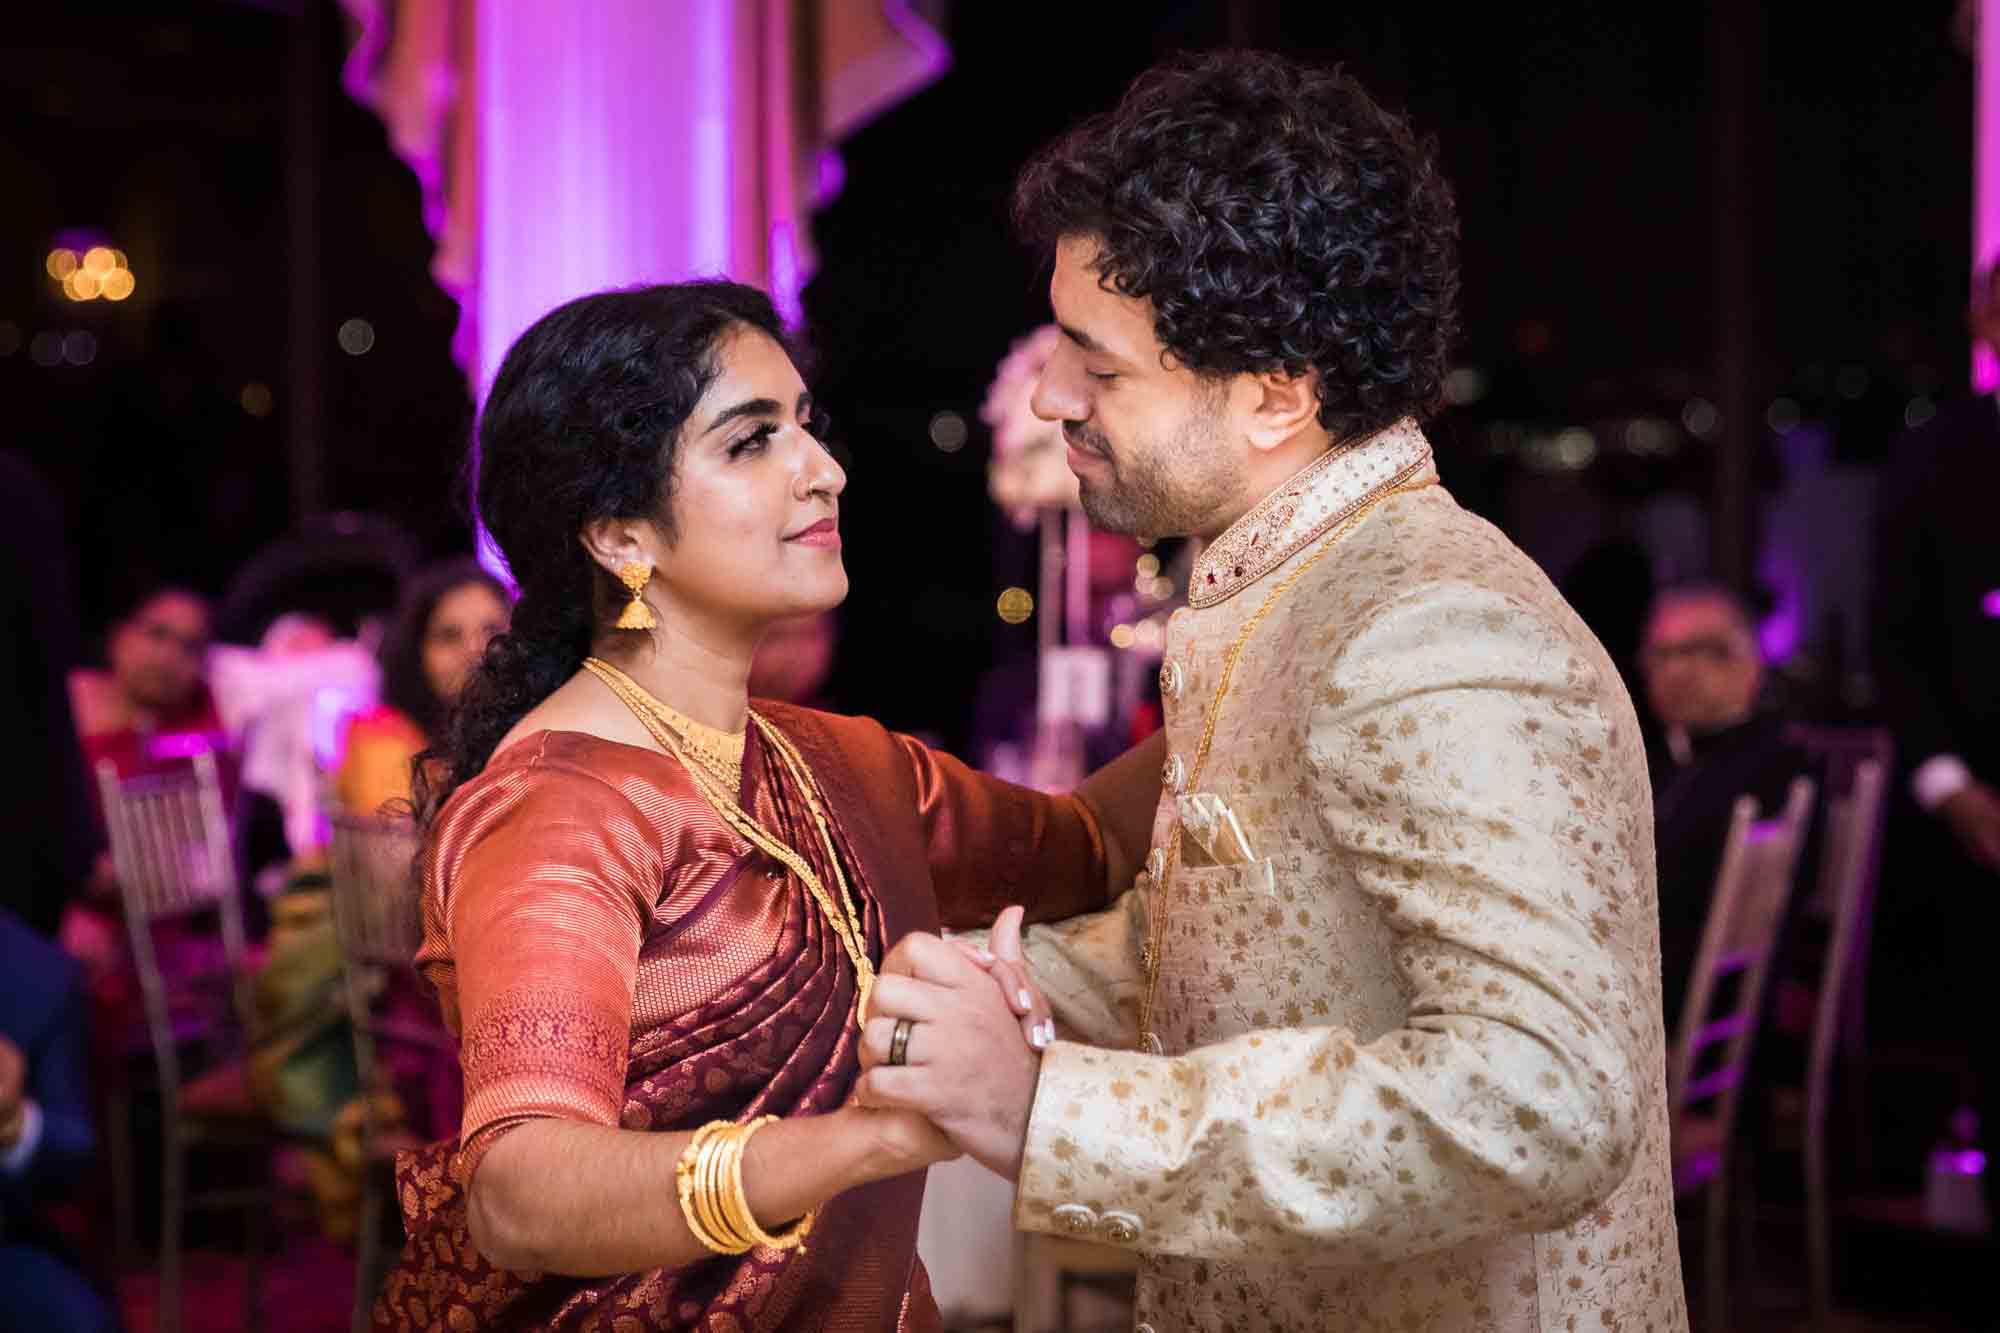 First dance of Indian bride wearing rust colored sari and groom wearing gold tunic for an article on Terrace on the Park wedding photo tips